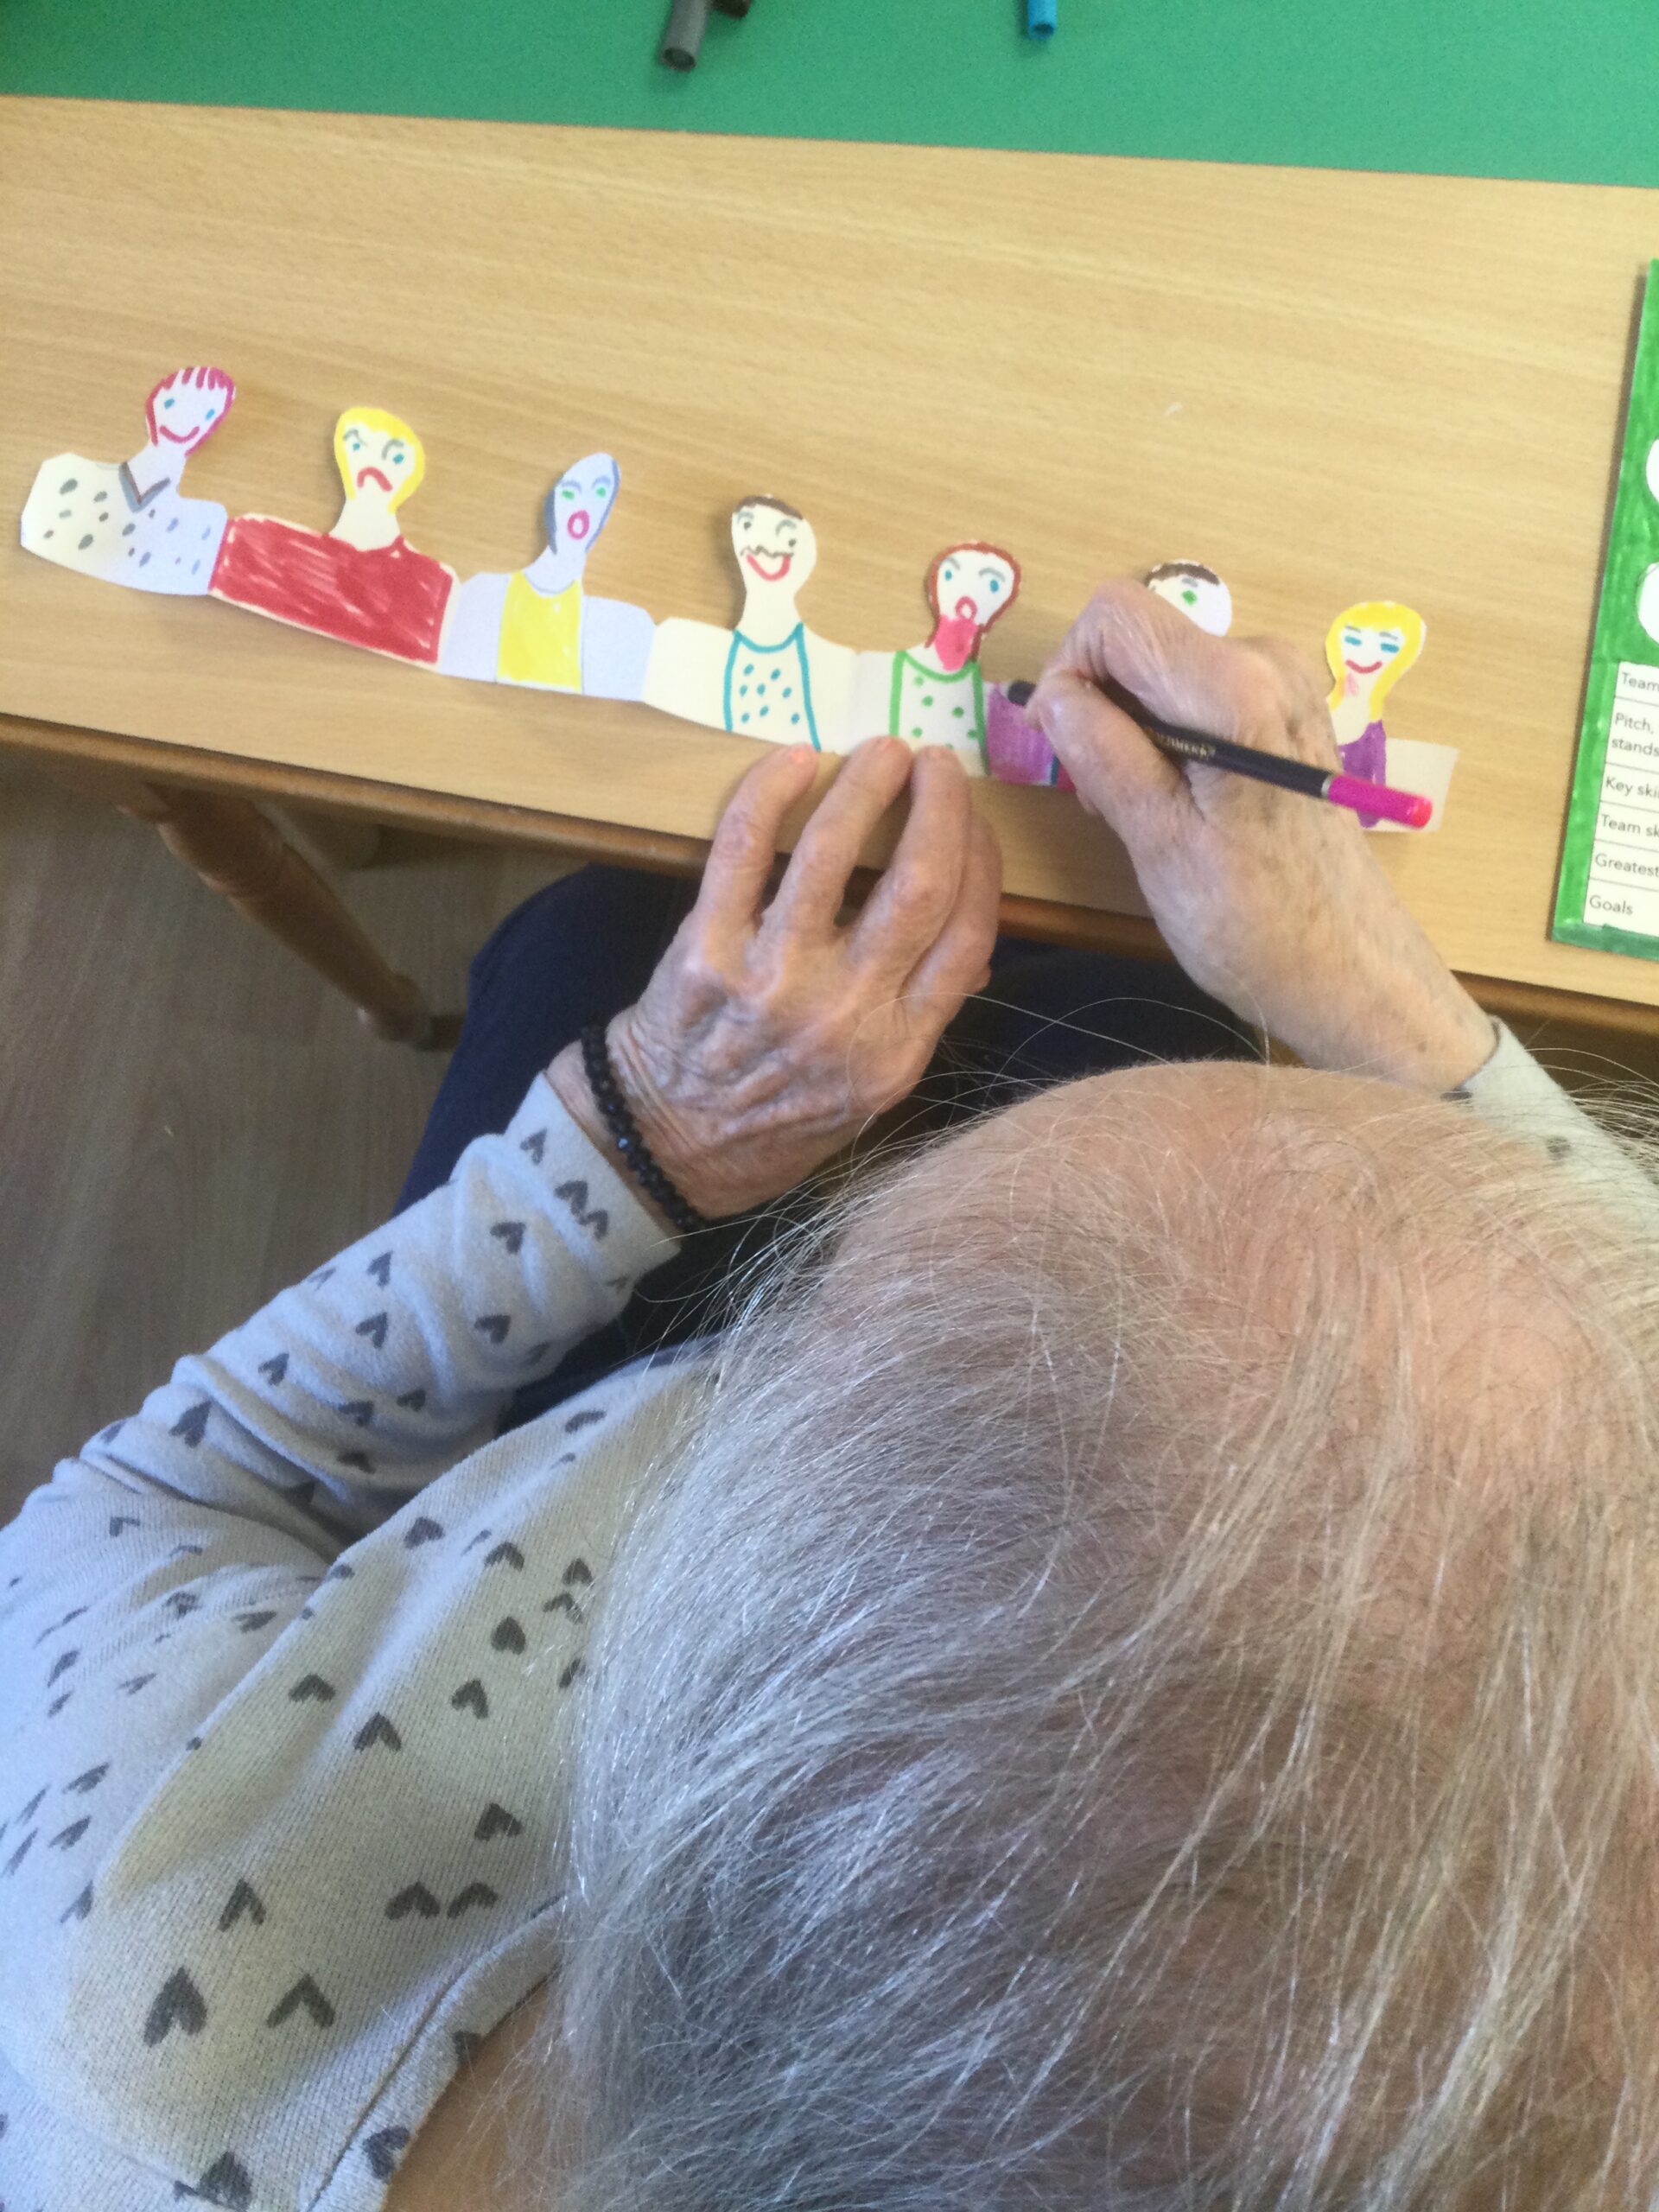 Overhead shot of person colouring in a row of faces